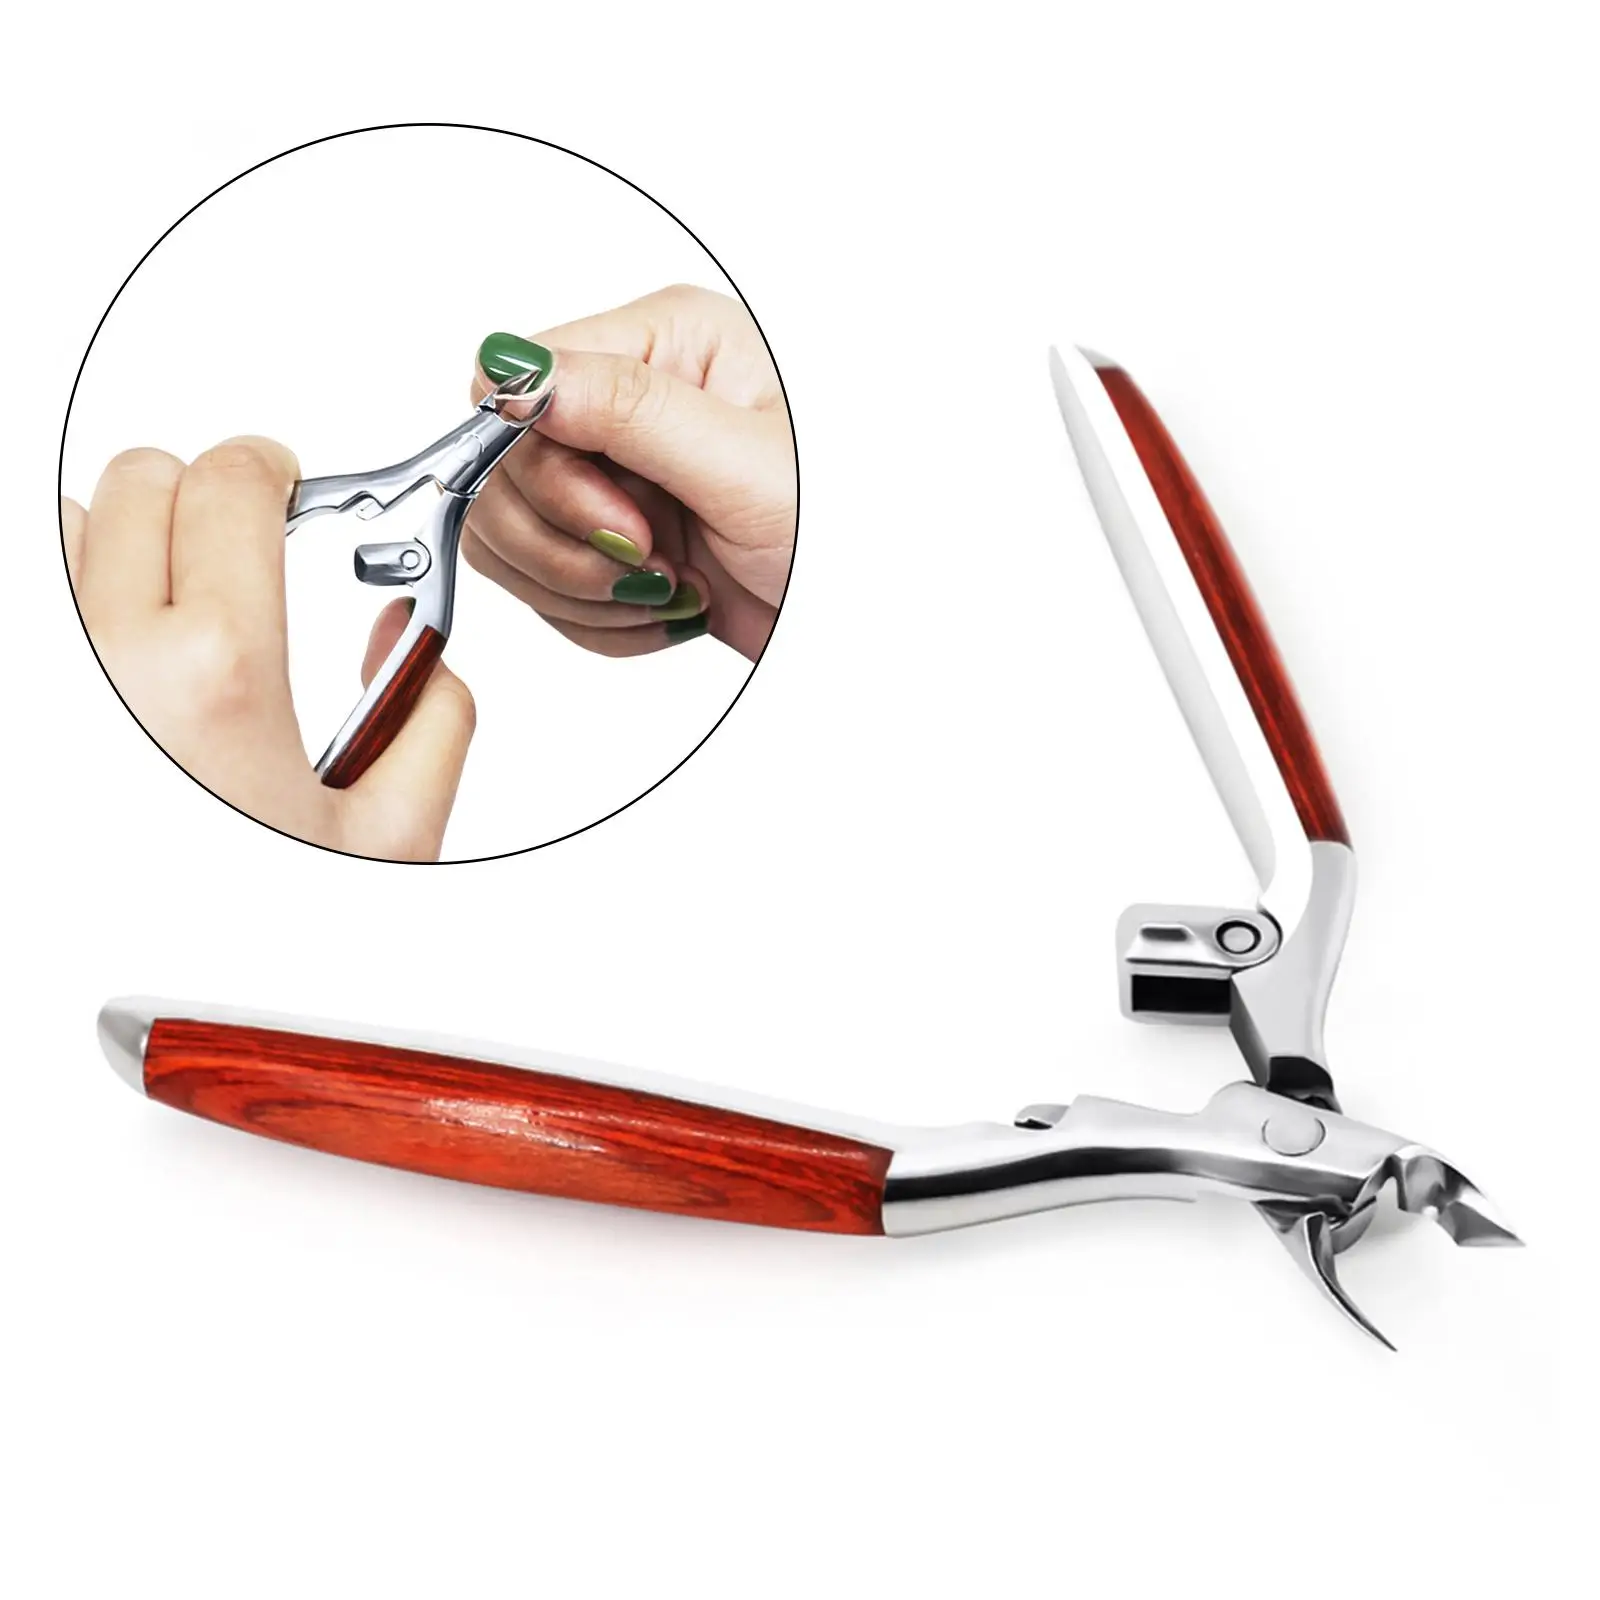 Manicure Nippers Manicure Pedicure Tools Stainless Steel Premium Nail Trimmer Remover for Fingernails Toenails SPA Home Salon